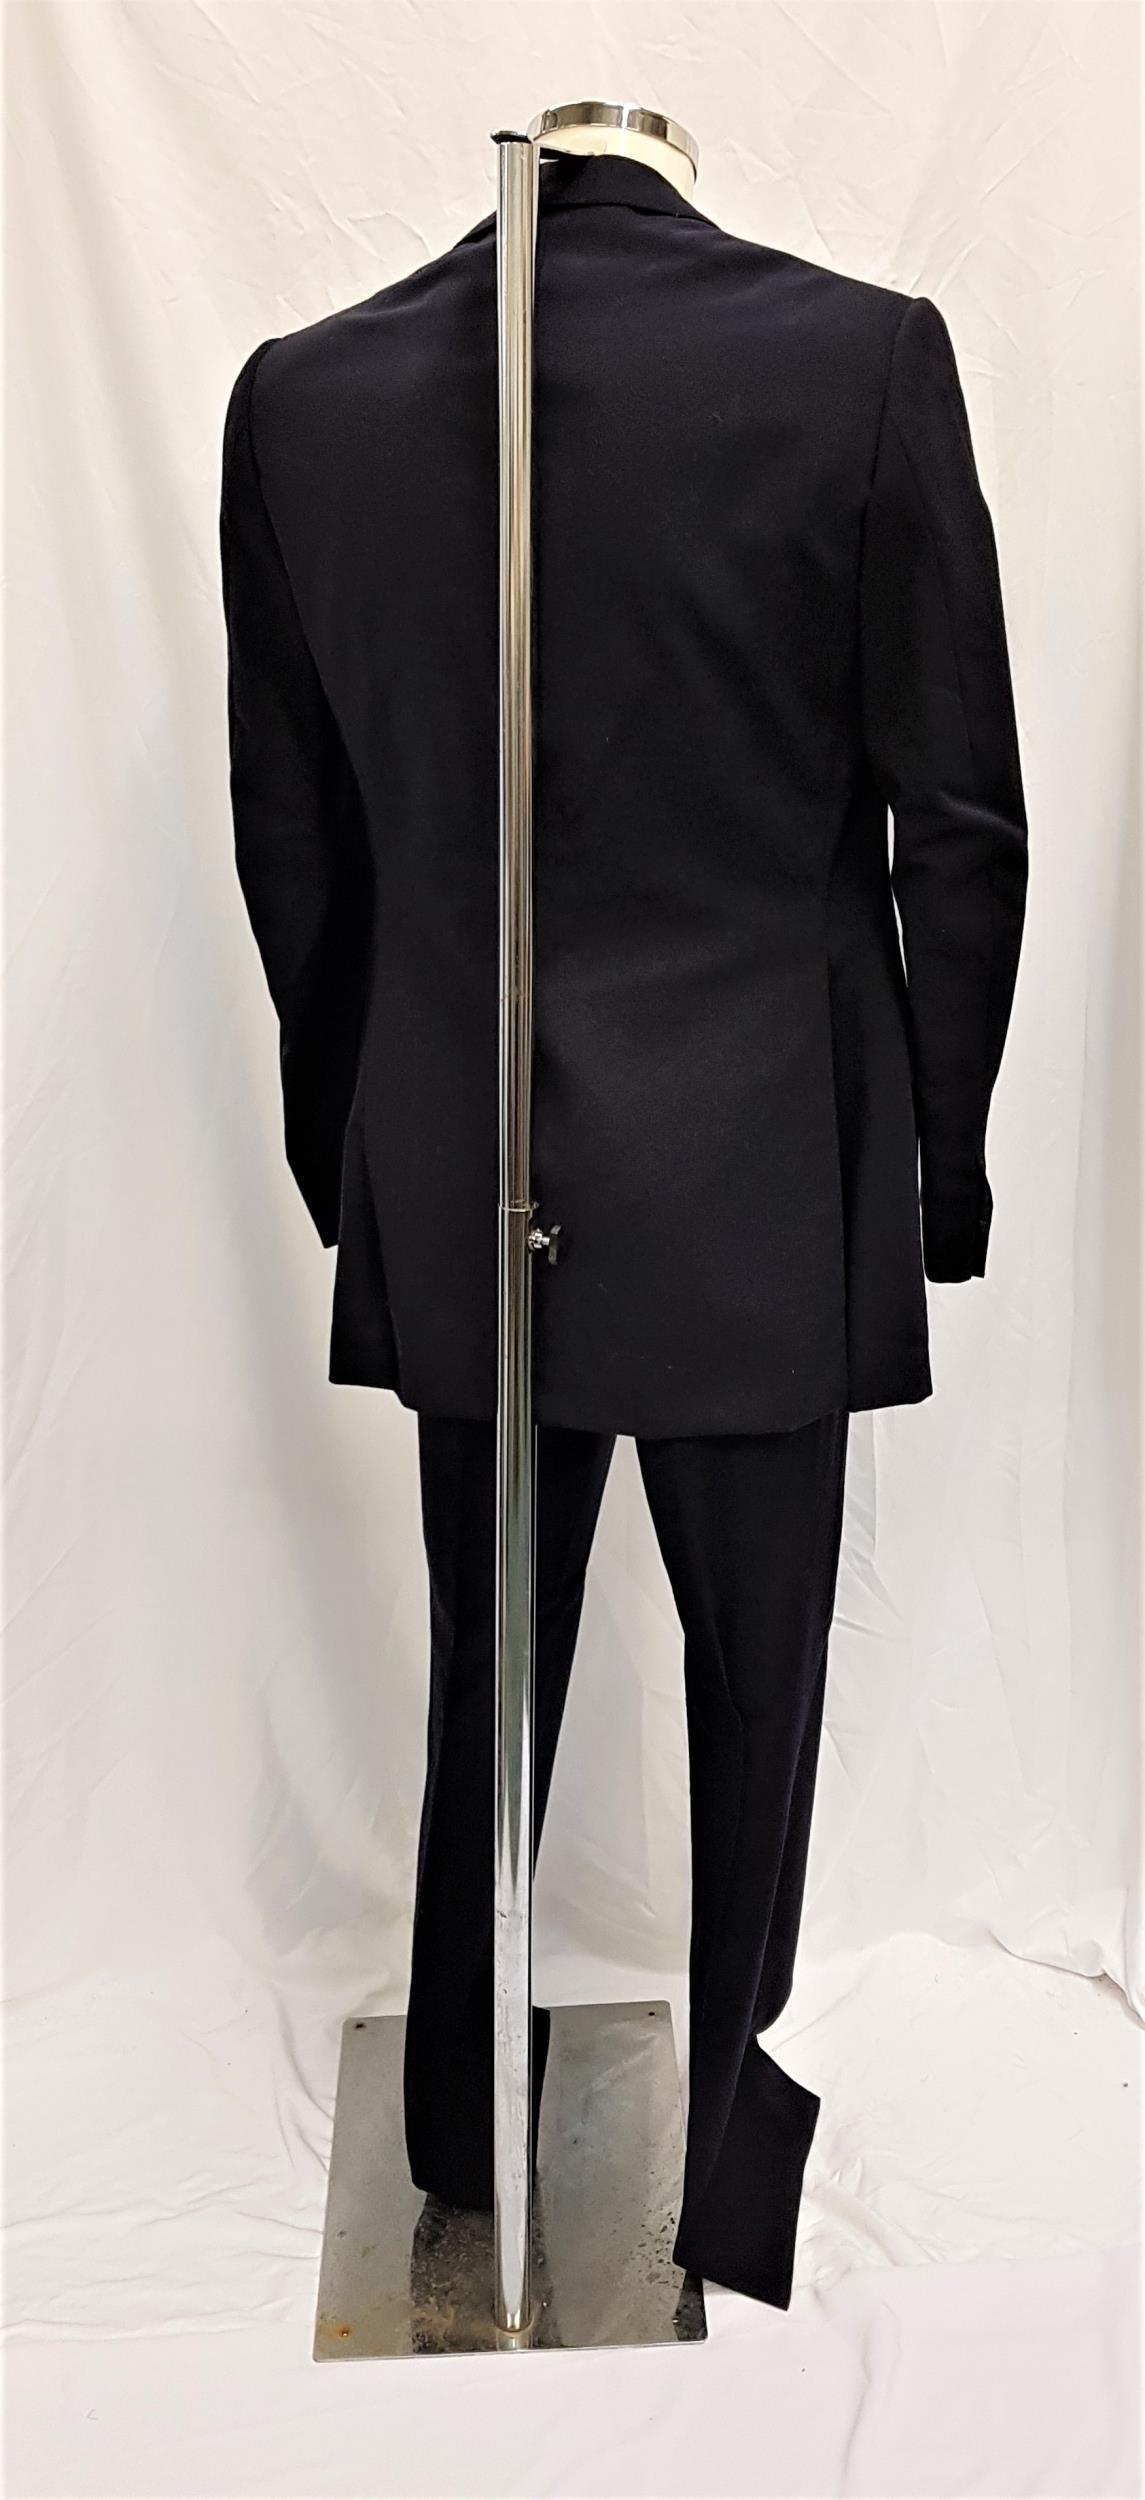 GEORGE HAMILTON - CUSTOM MADE NAVY BLUE SUIT the trousers with 34 inch inside leg and 33 inch waist, - Image 2 of 4